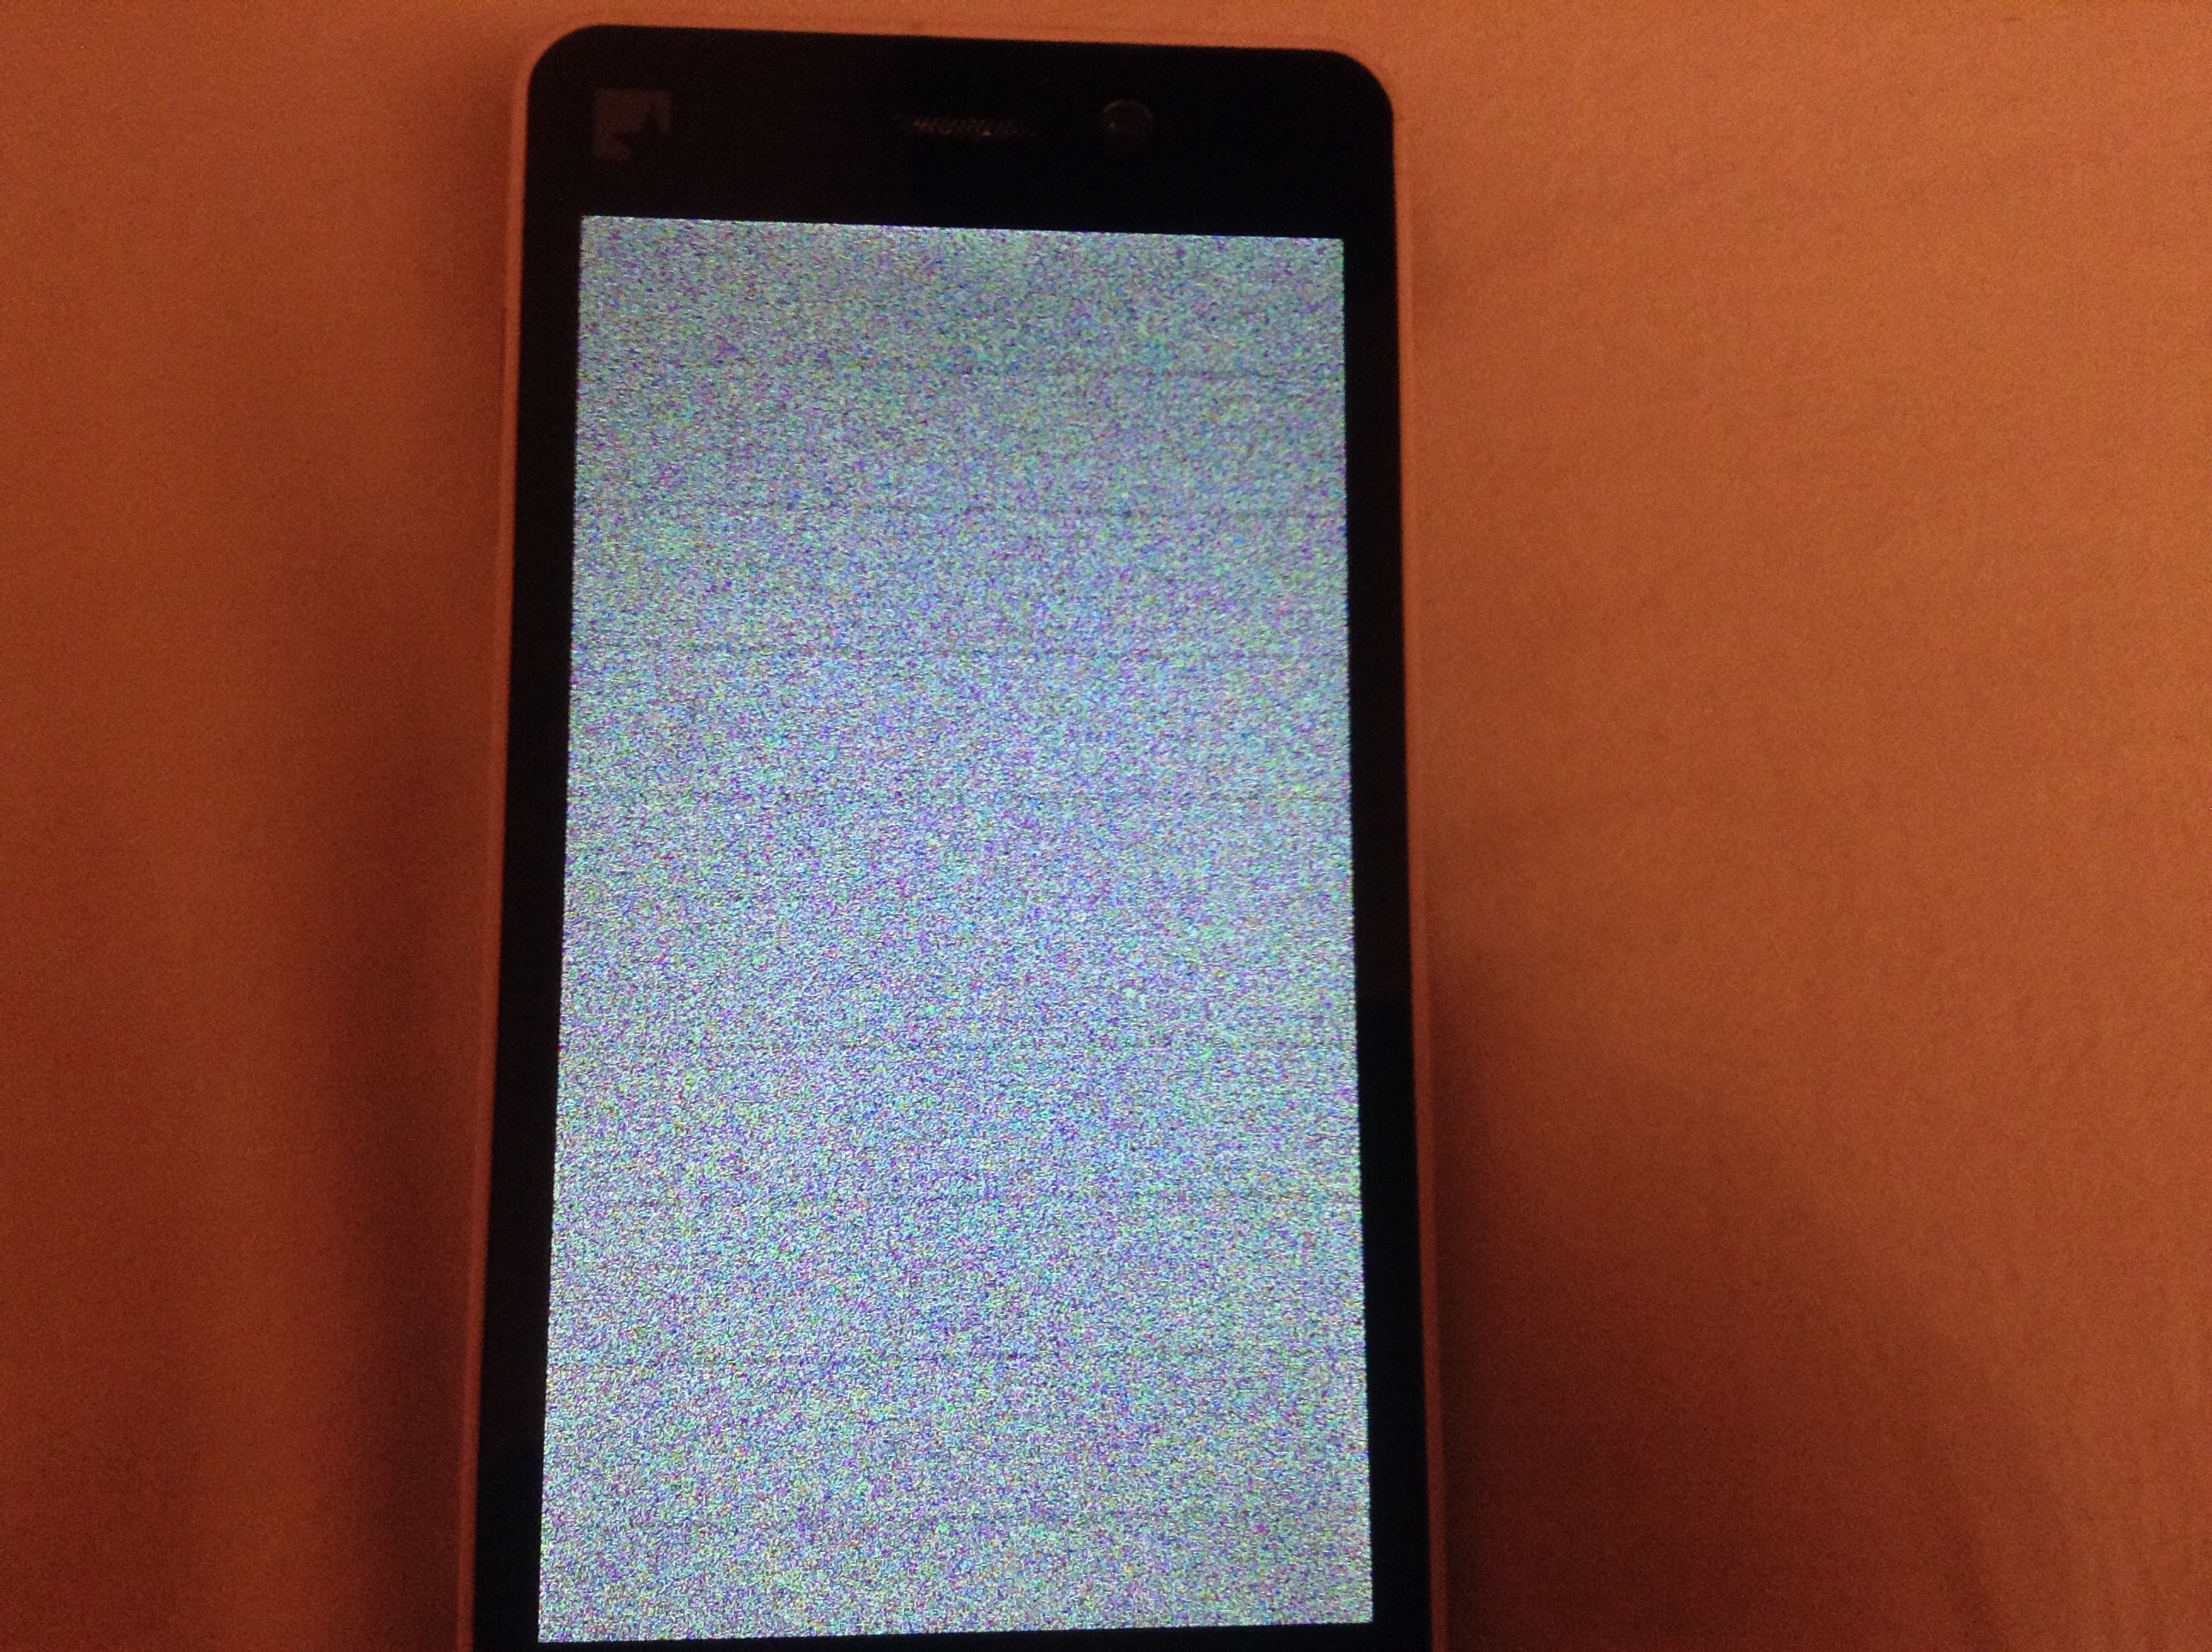 Display problem - whole screen filled with noisy pixels of different colors - fairphone 1 - fairphone community forum